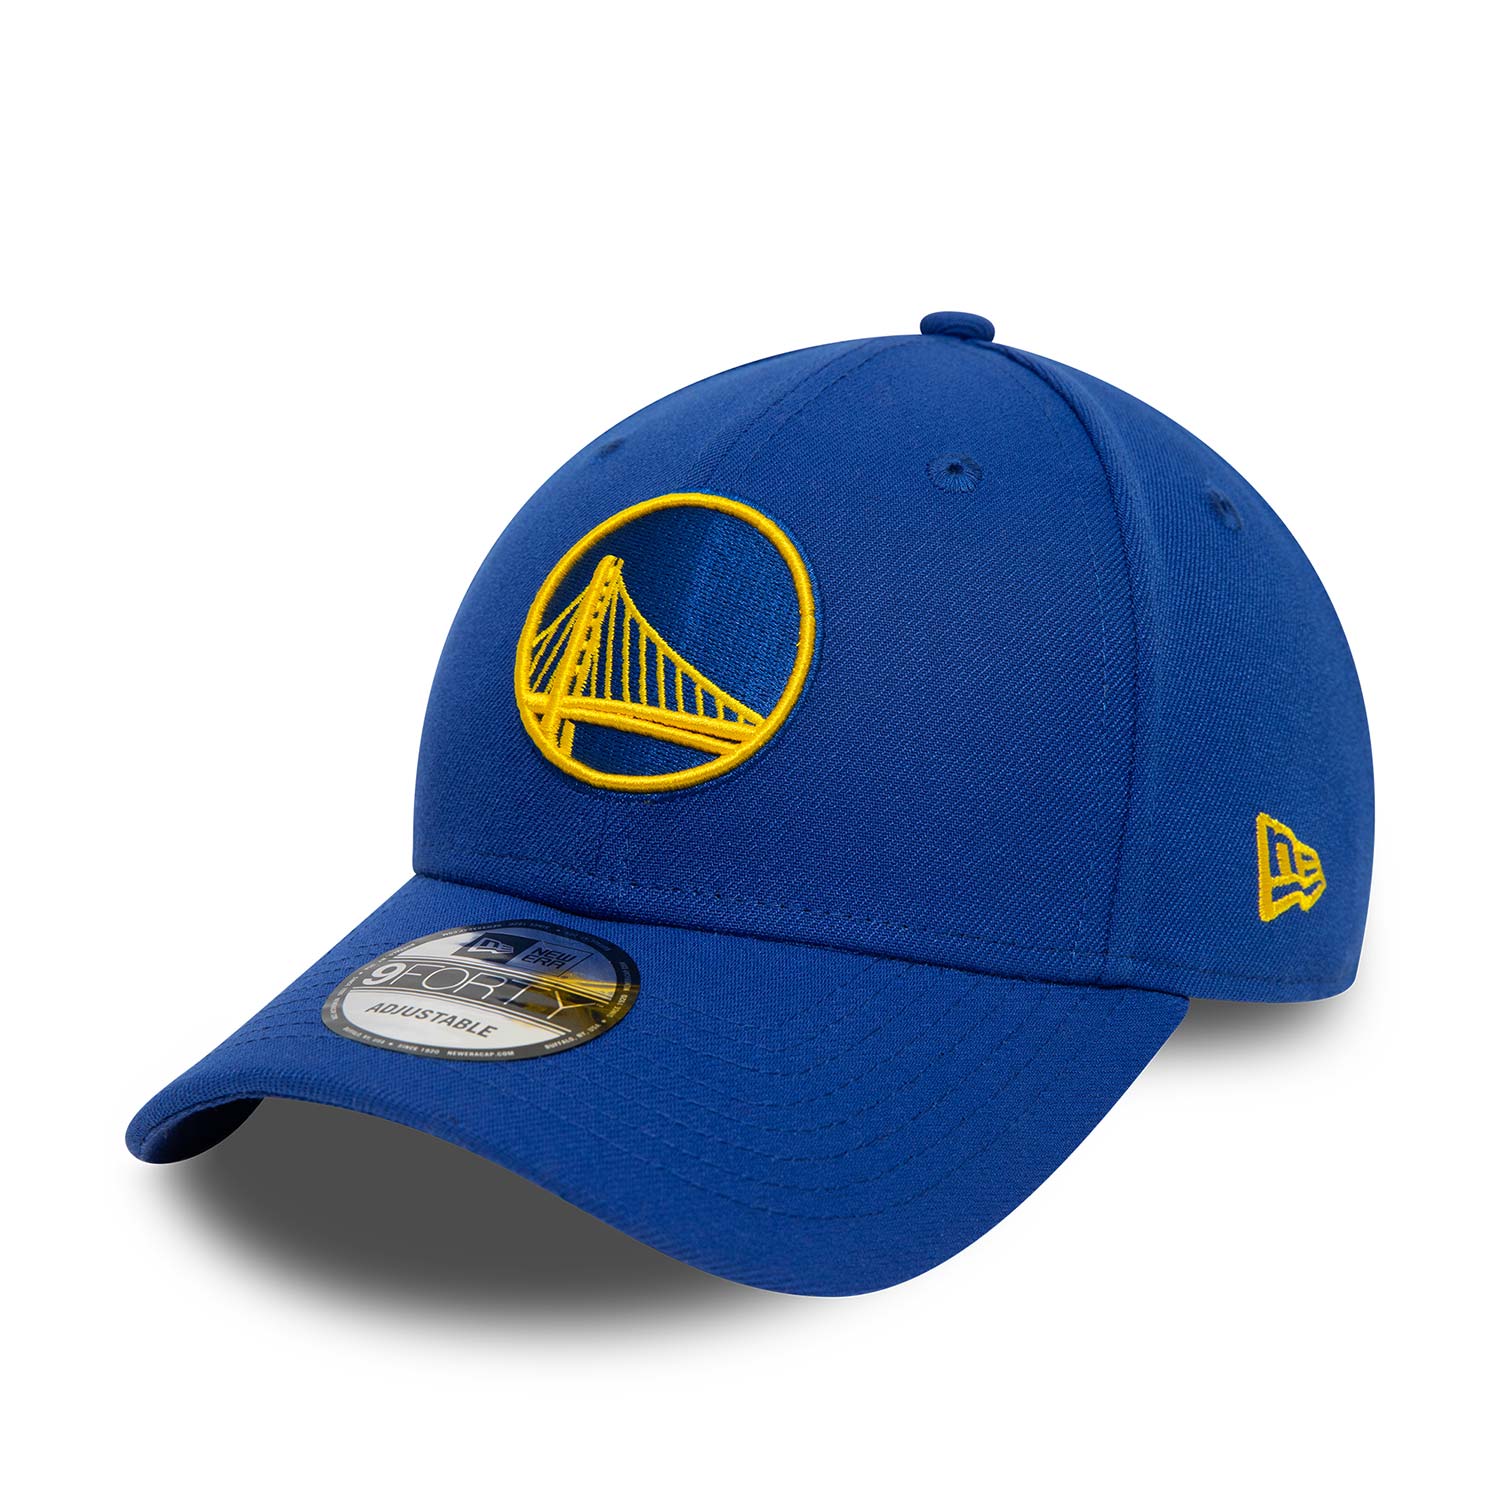 Golden State Warriors League 9FORTY-Kappe in Blau